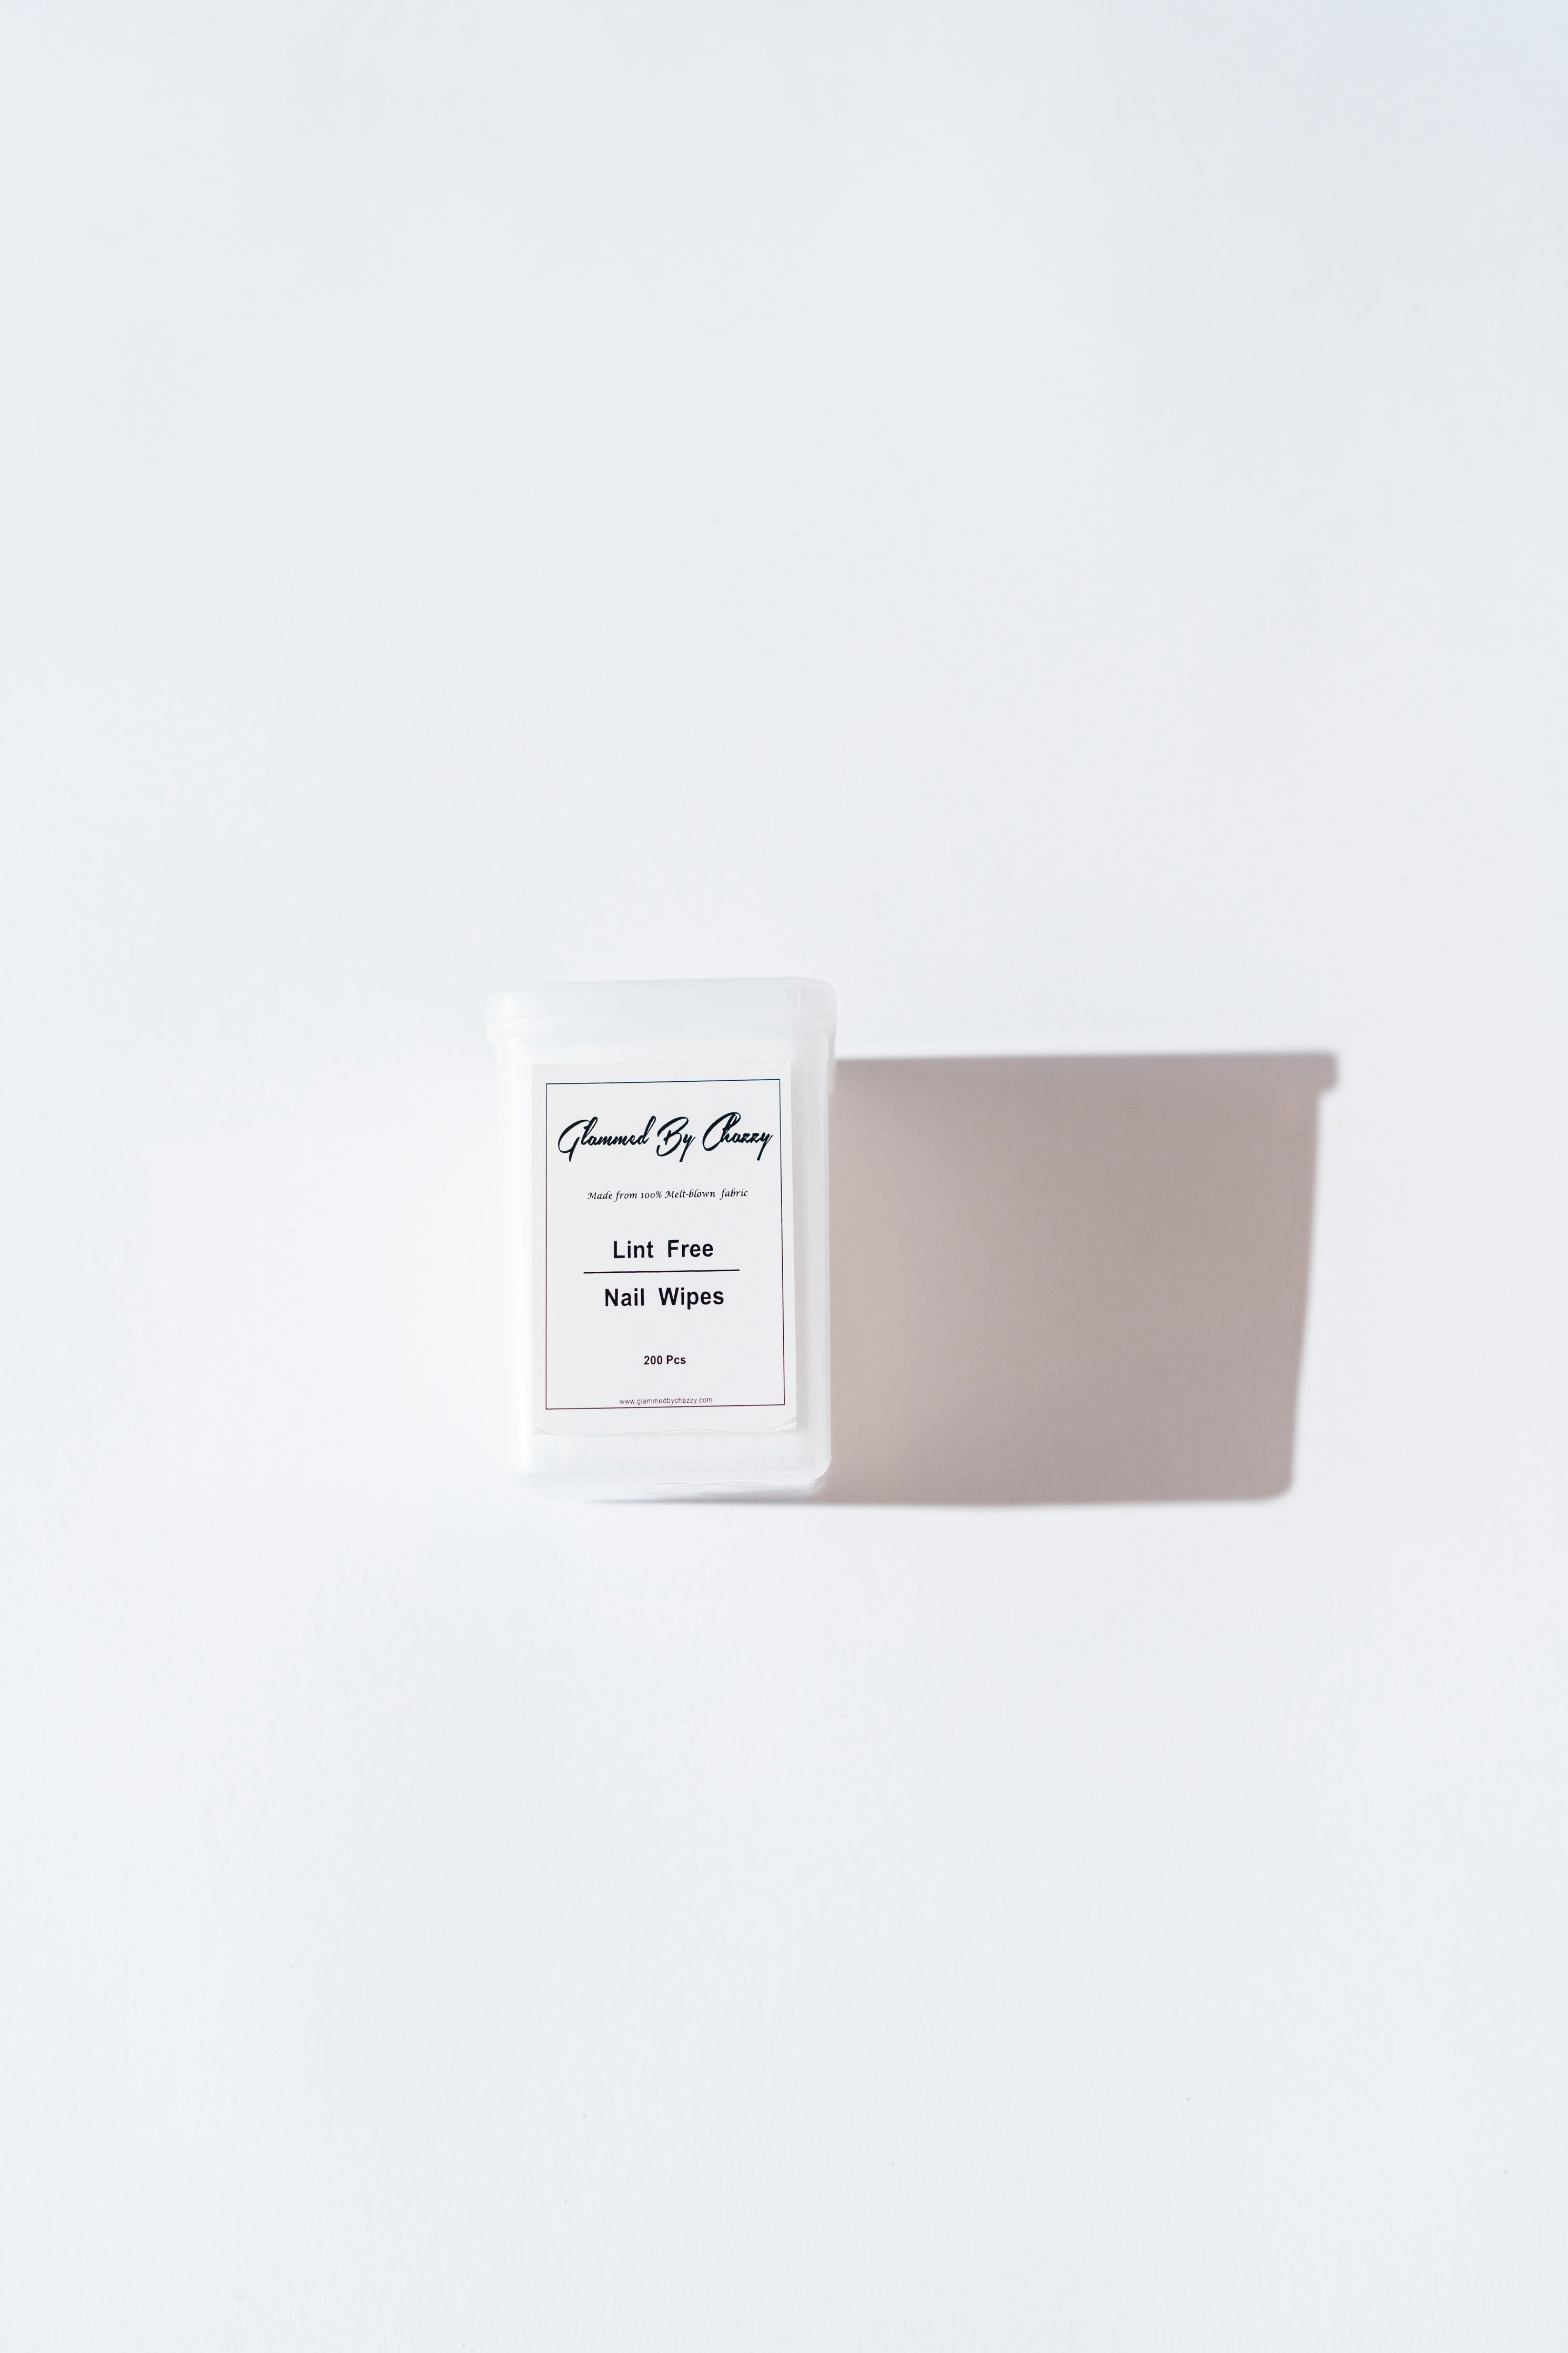 Lint Free Nail Wipes by Glammed by Chazzy